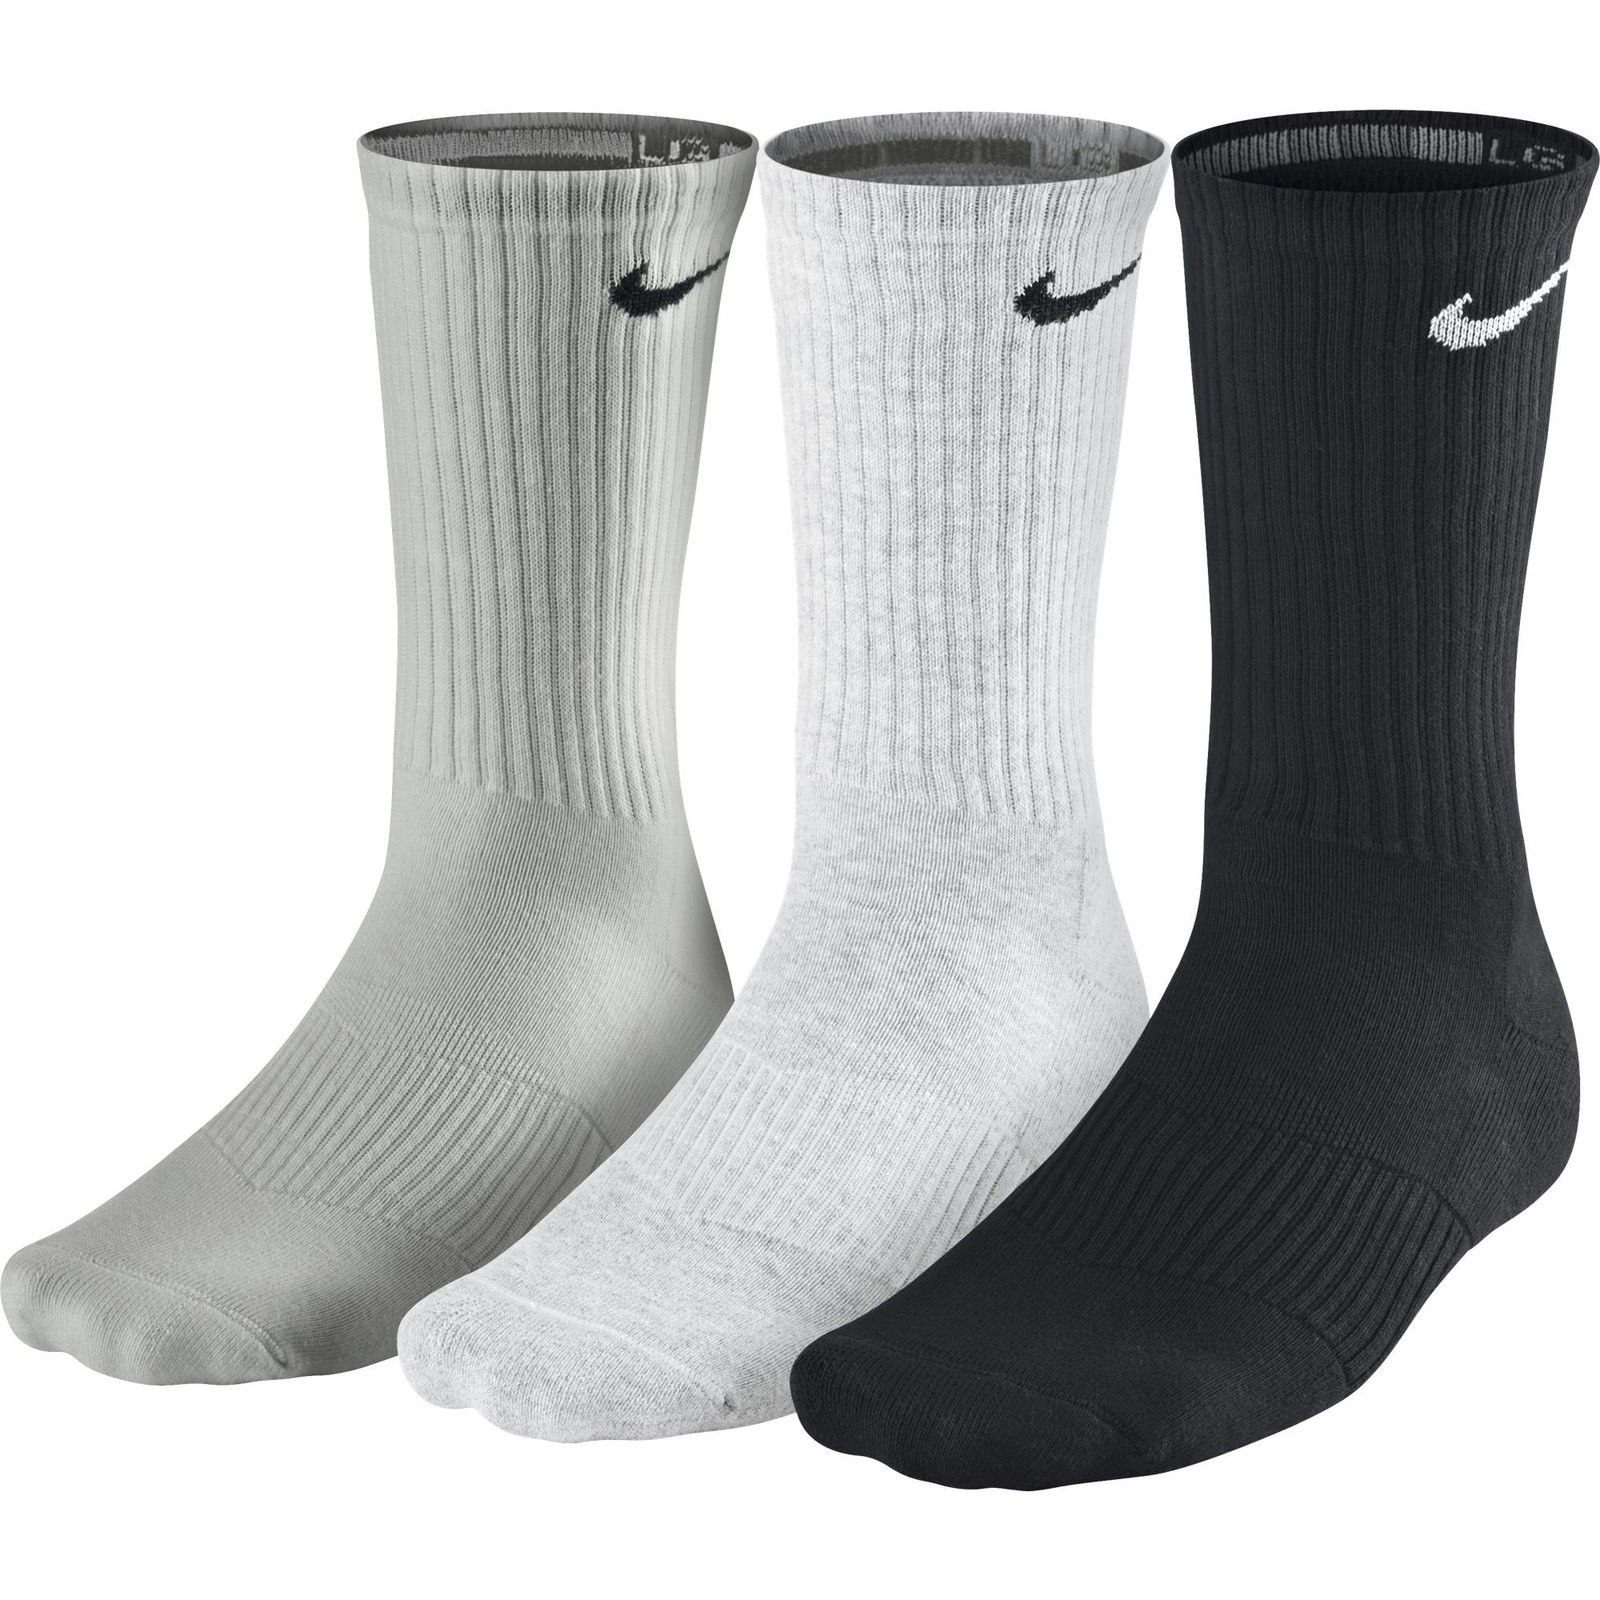 Nike Sport Performance Cotton Sock (3 Pair) Black, White and Grey ...